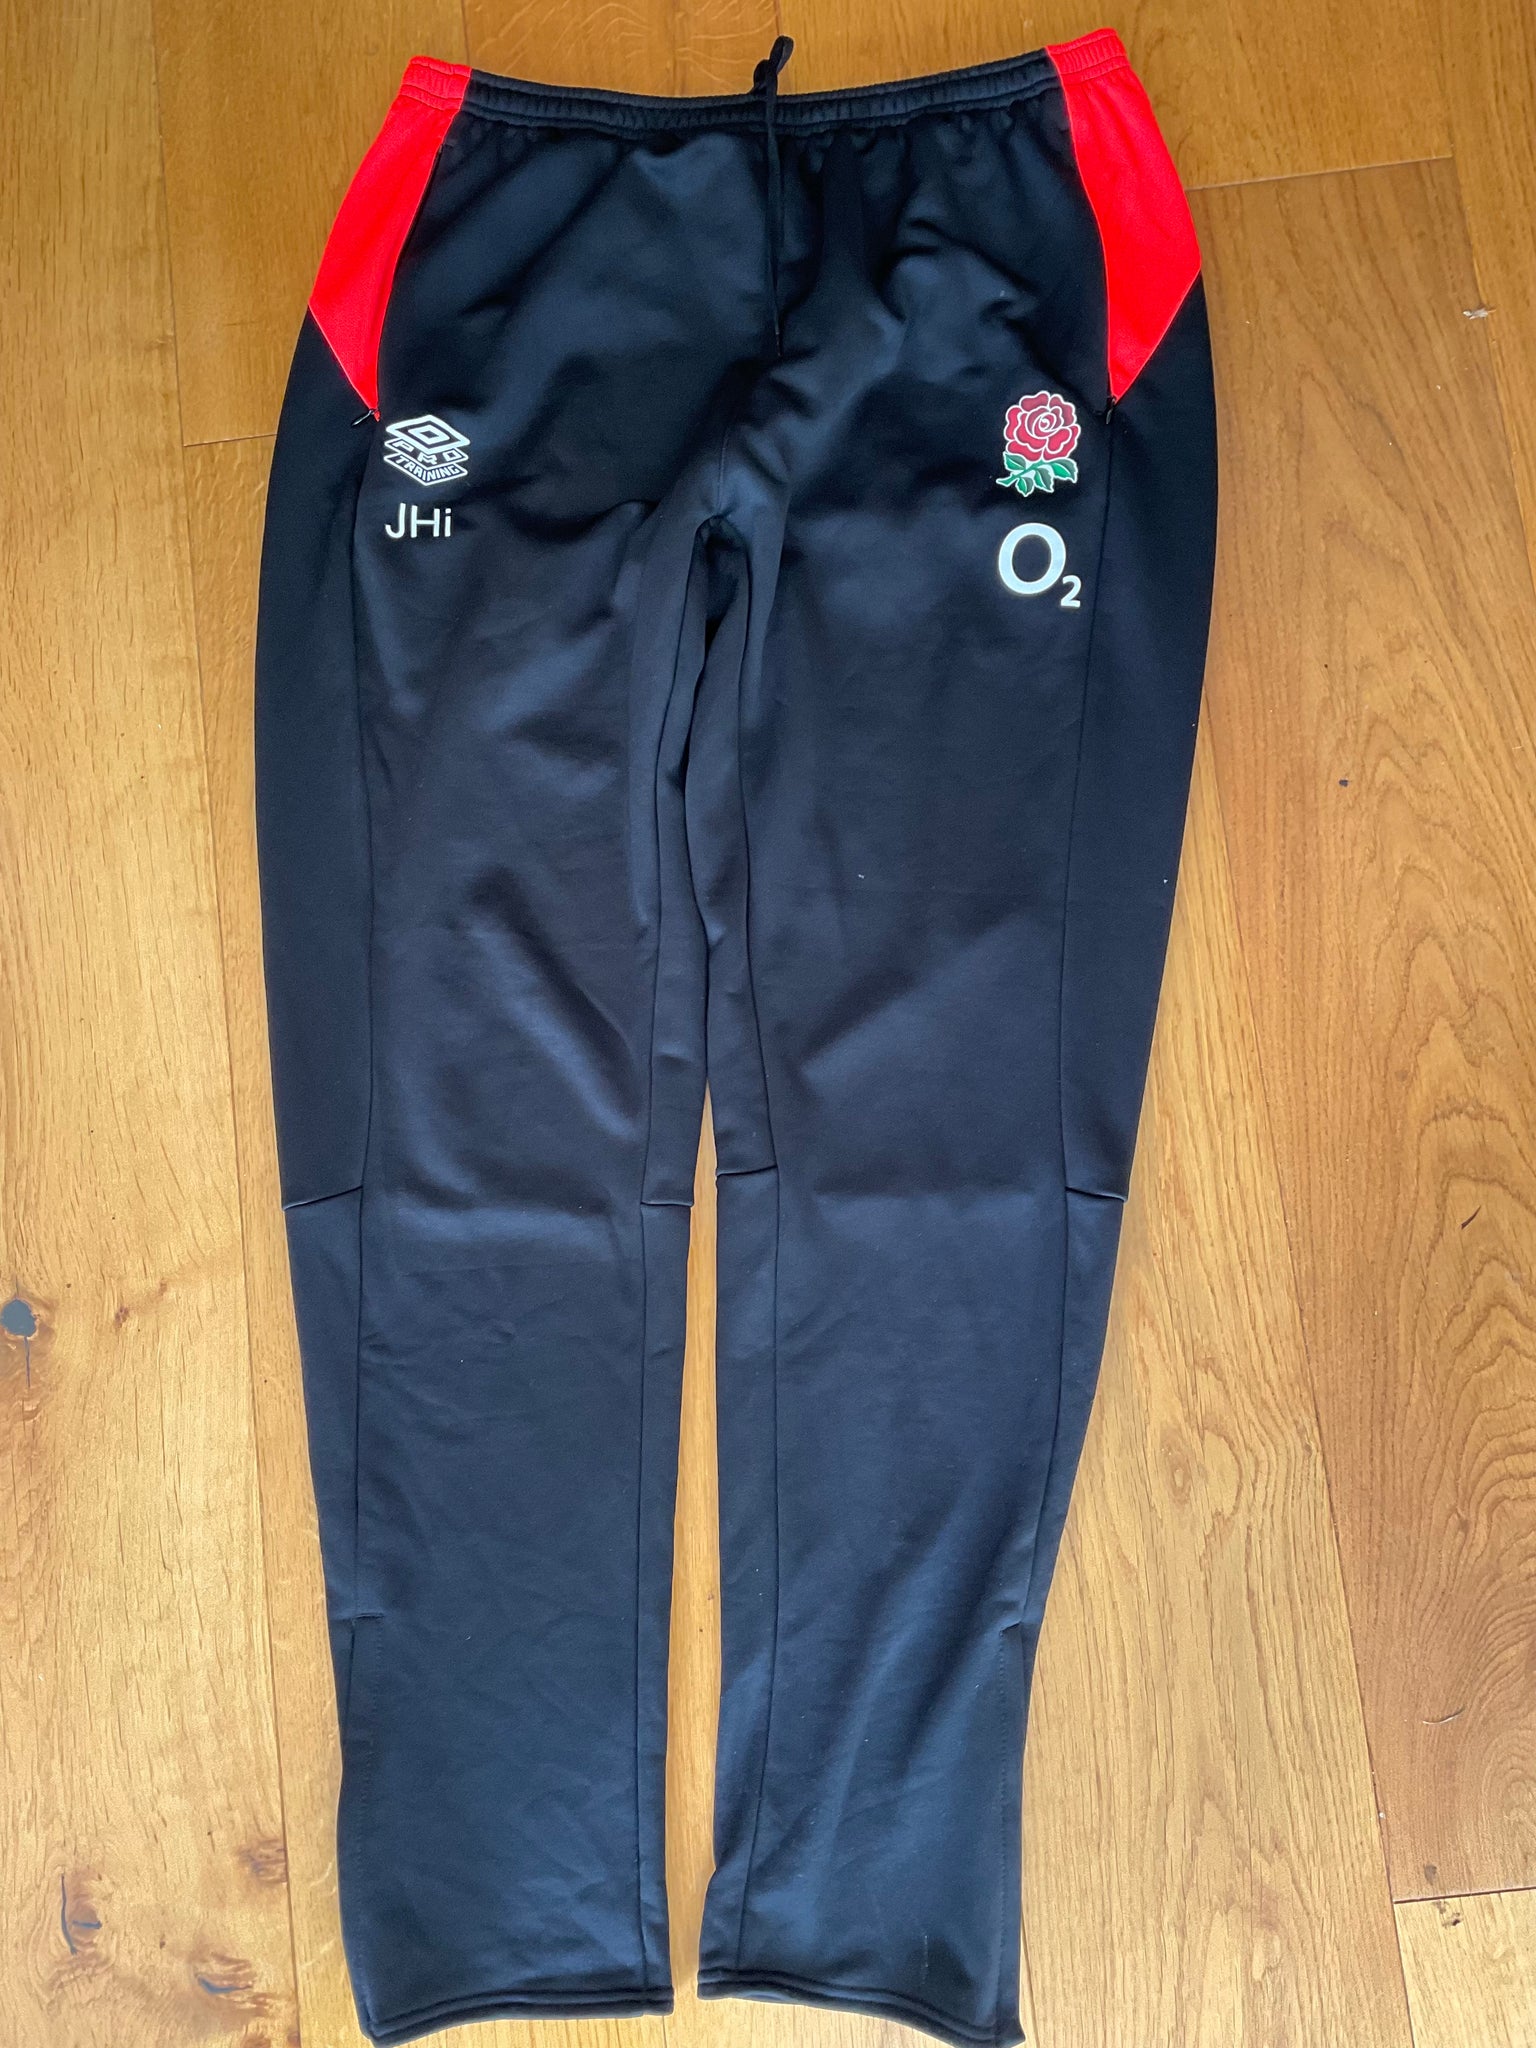 Jonny Hill - England Rugby Tapered Pants  [Black & Coral]